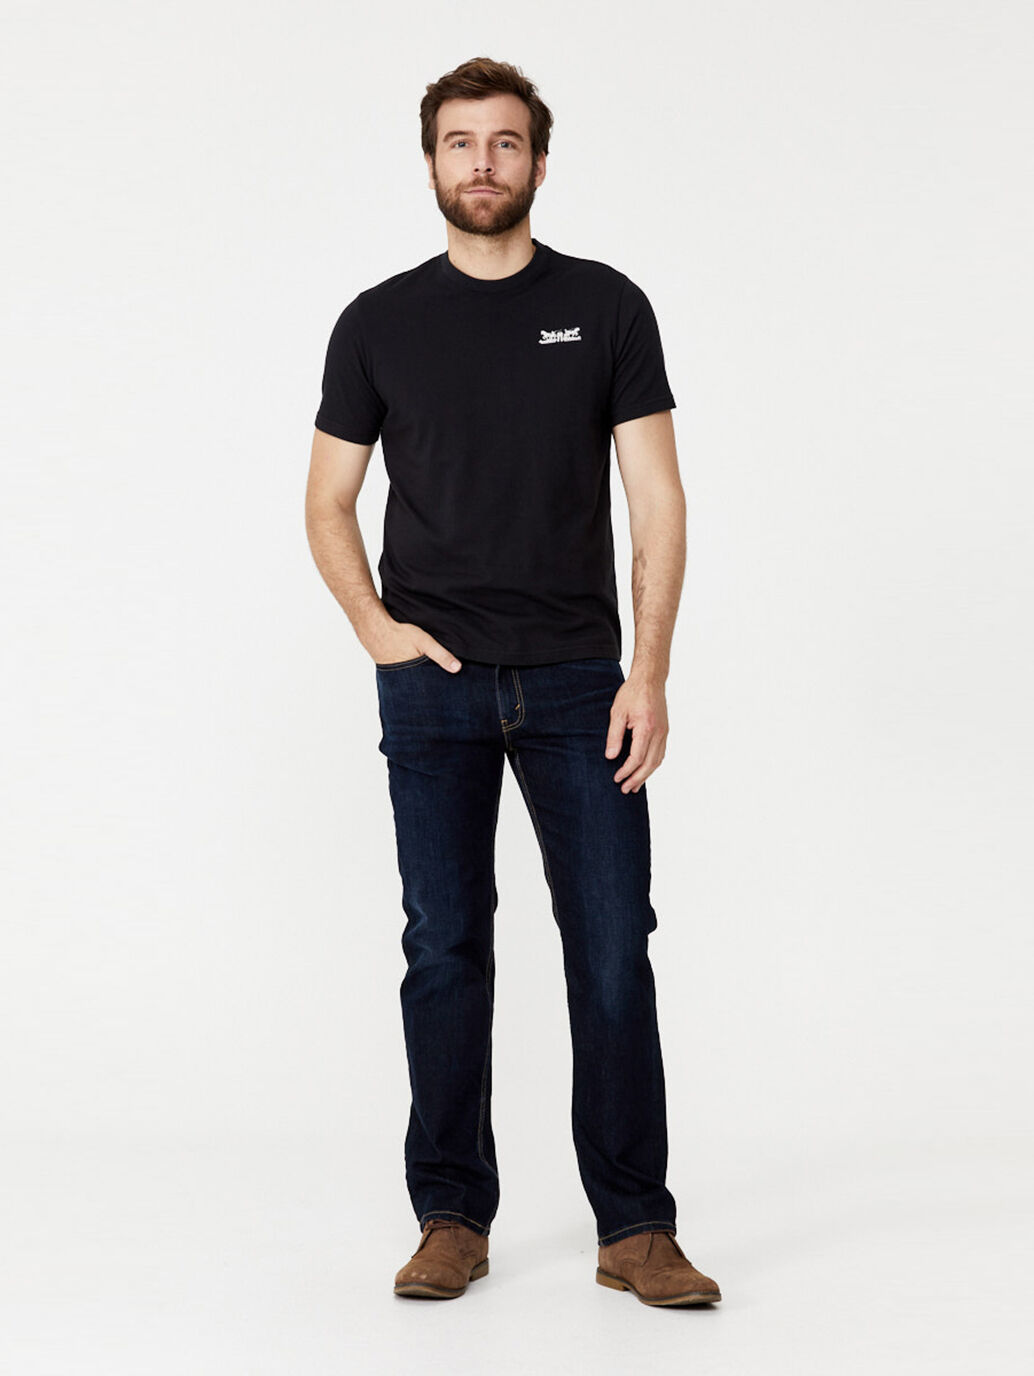 levis 514 relaxed fit